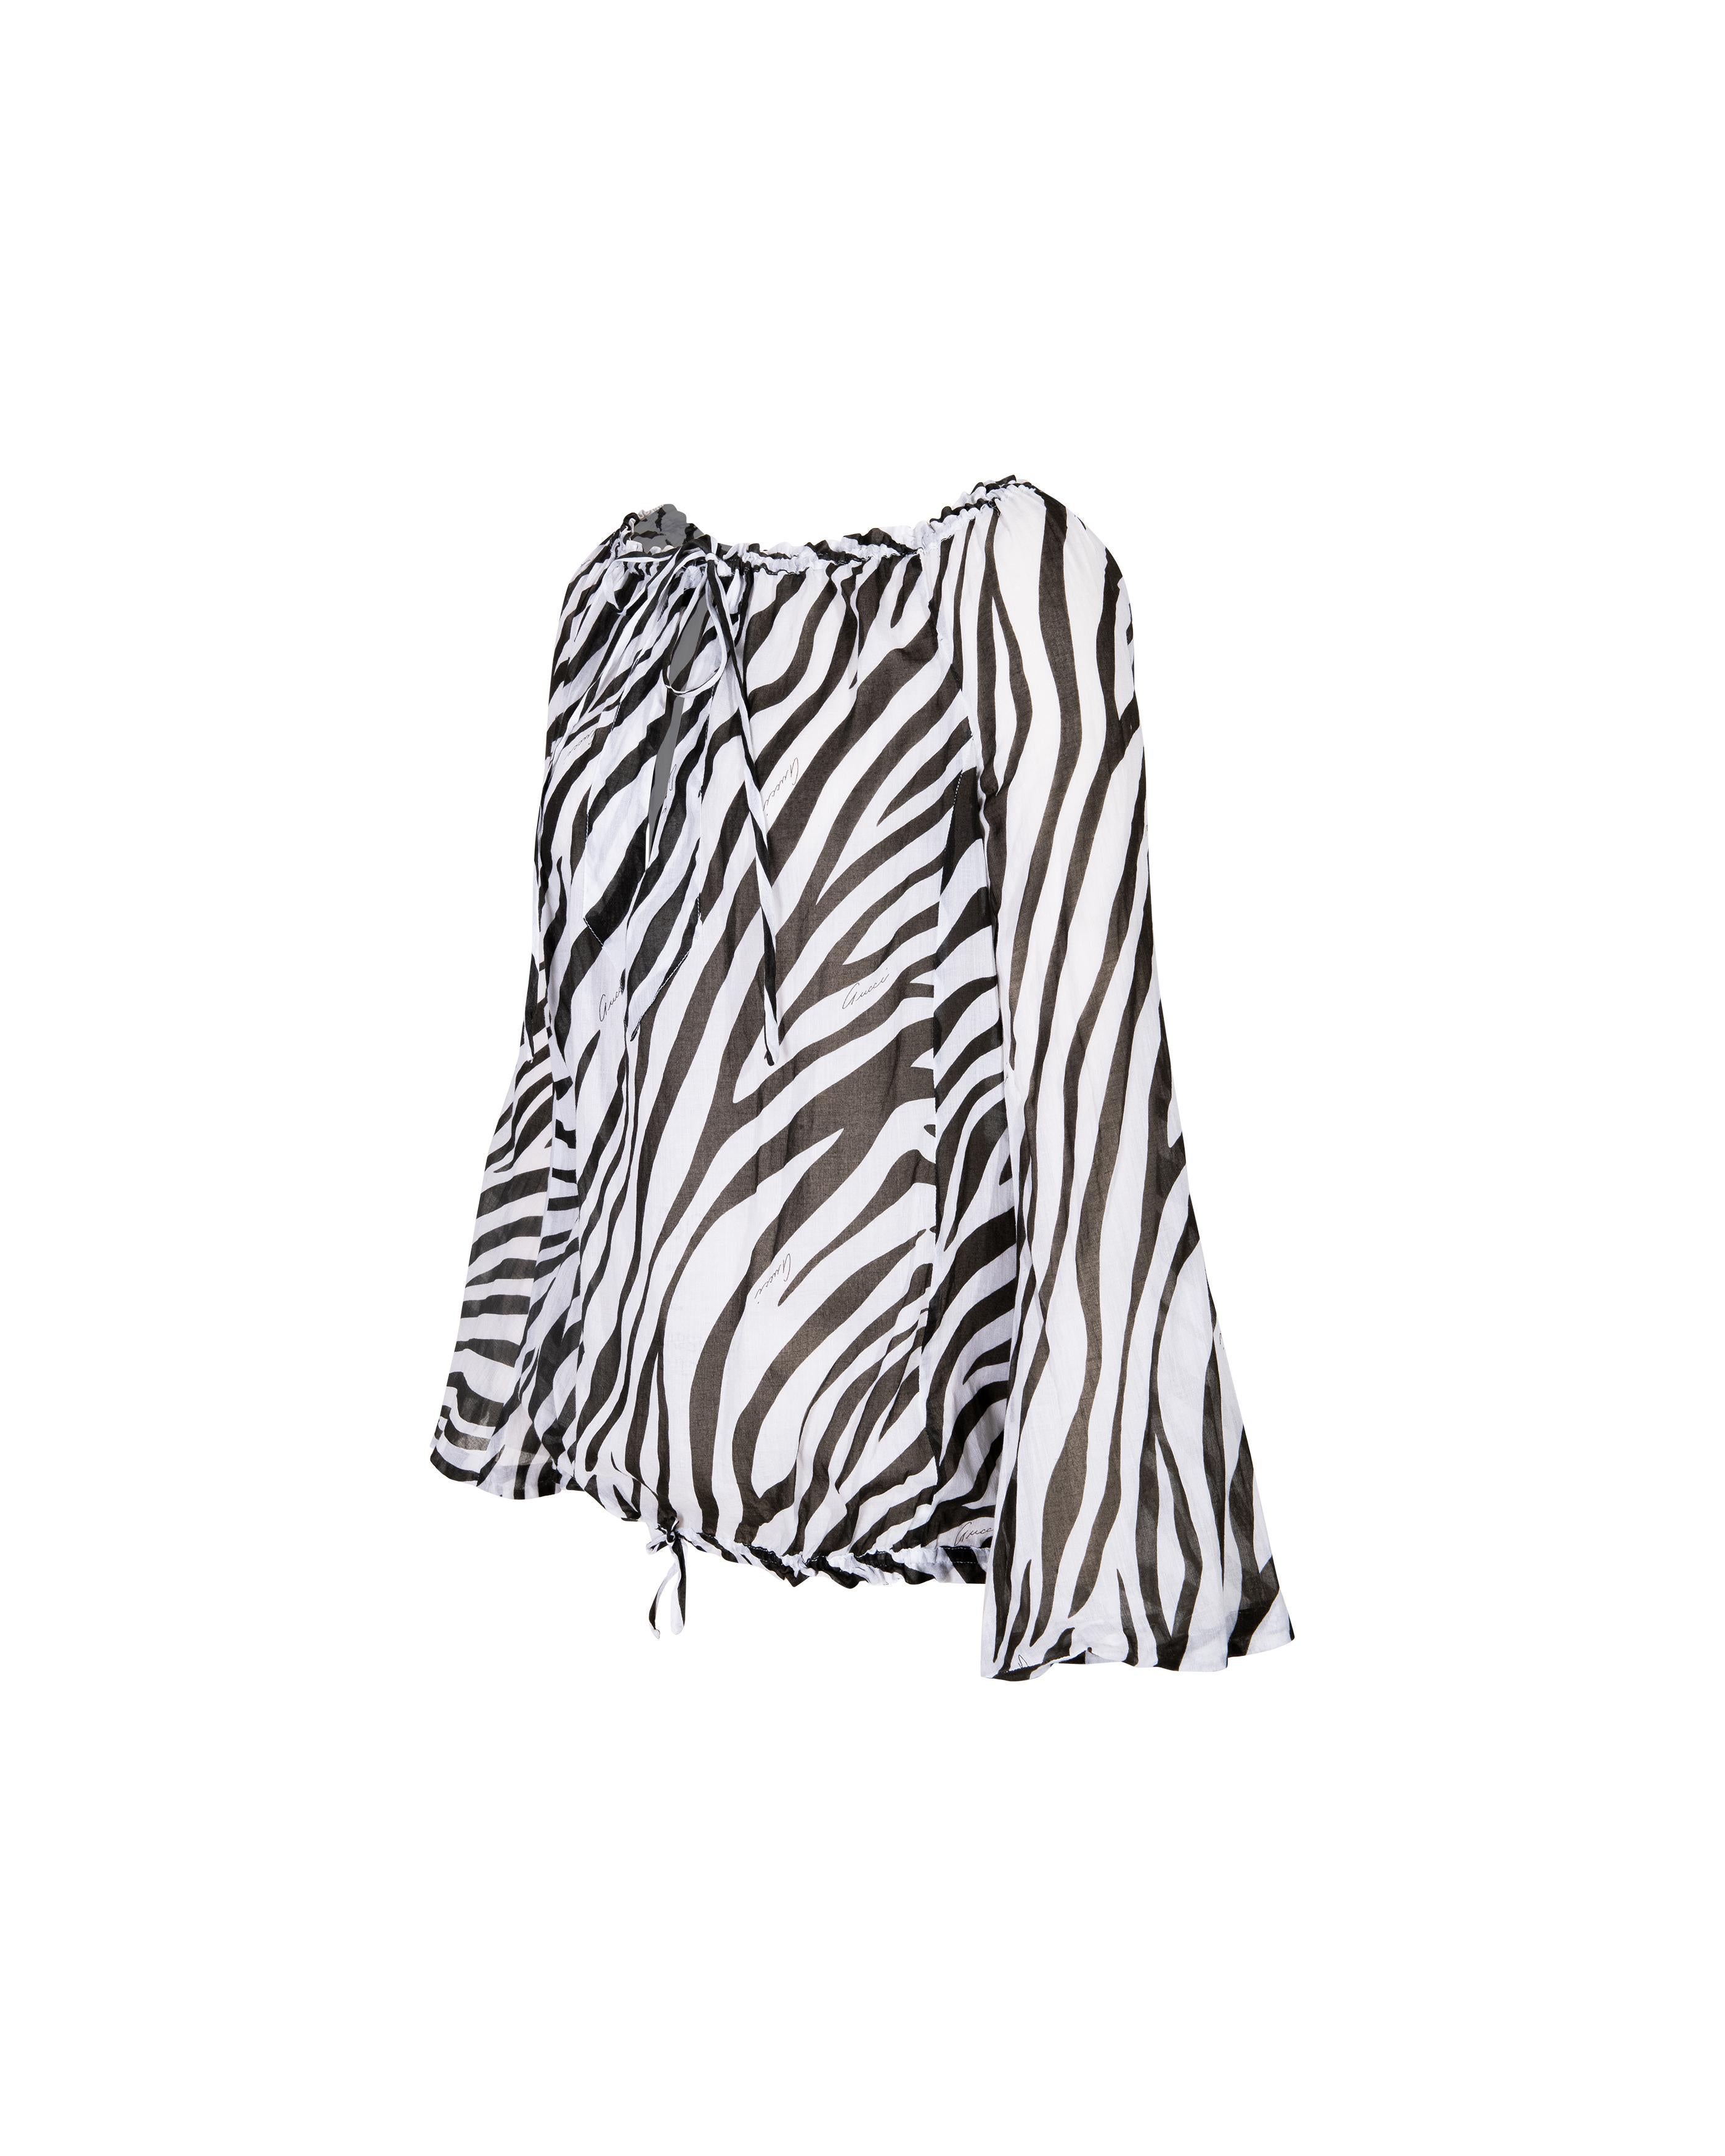 S/S 1996 Gucci by Tom Ford Black and White Zebra Print Cotton Blouse In Good Condition In North Hollywood, CA